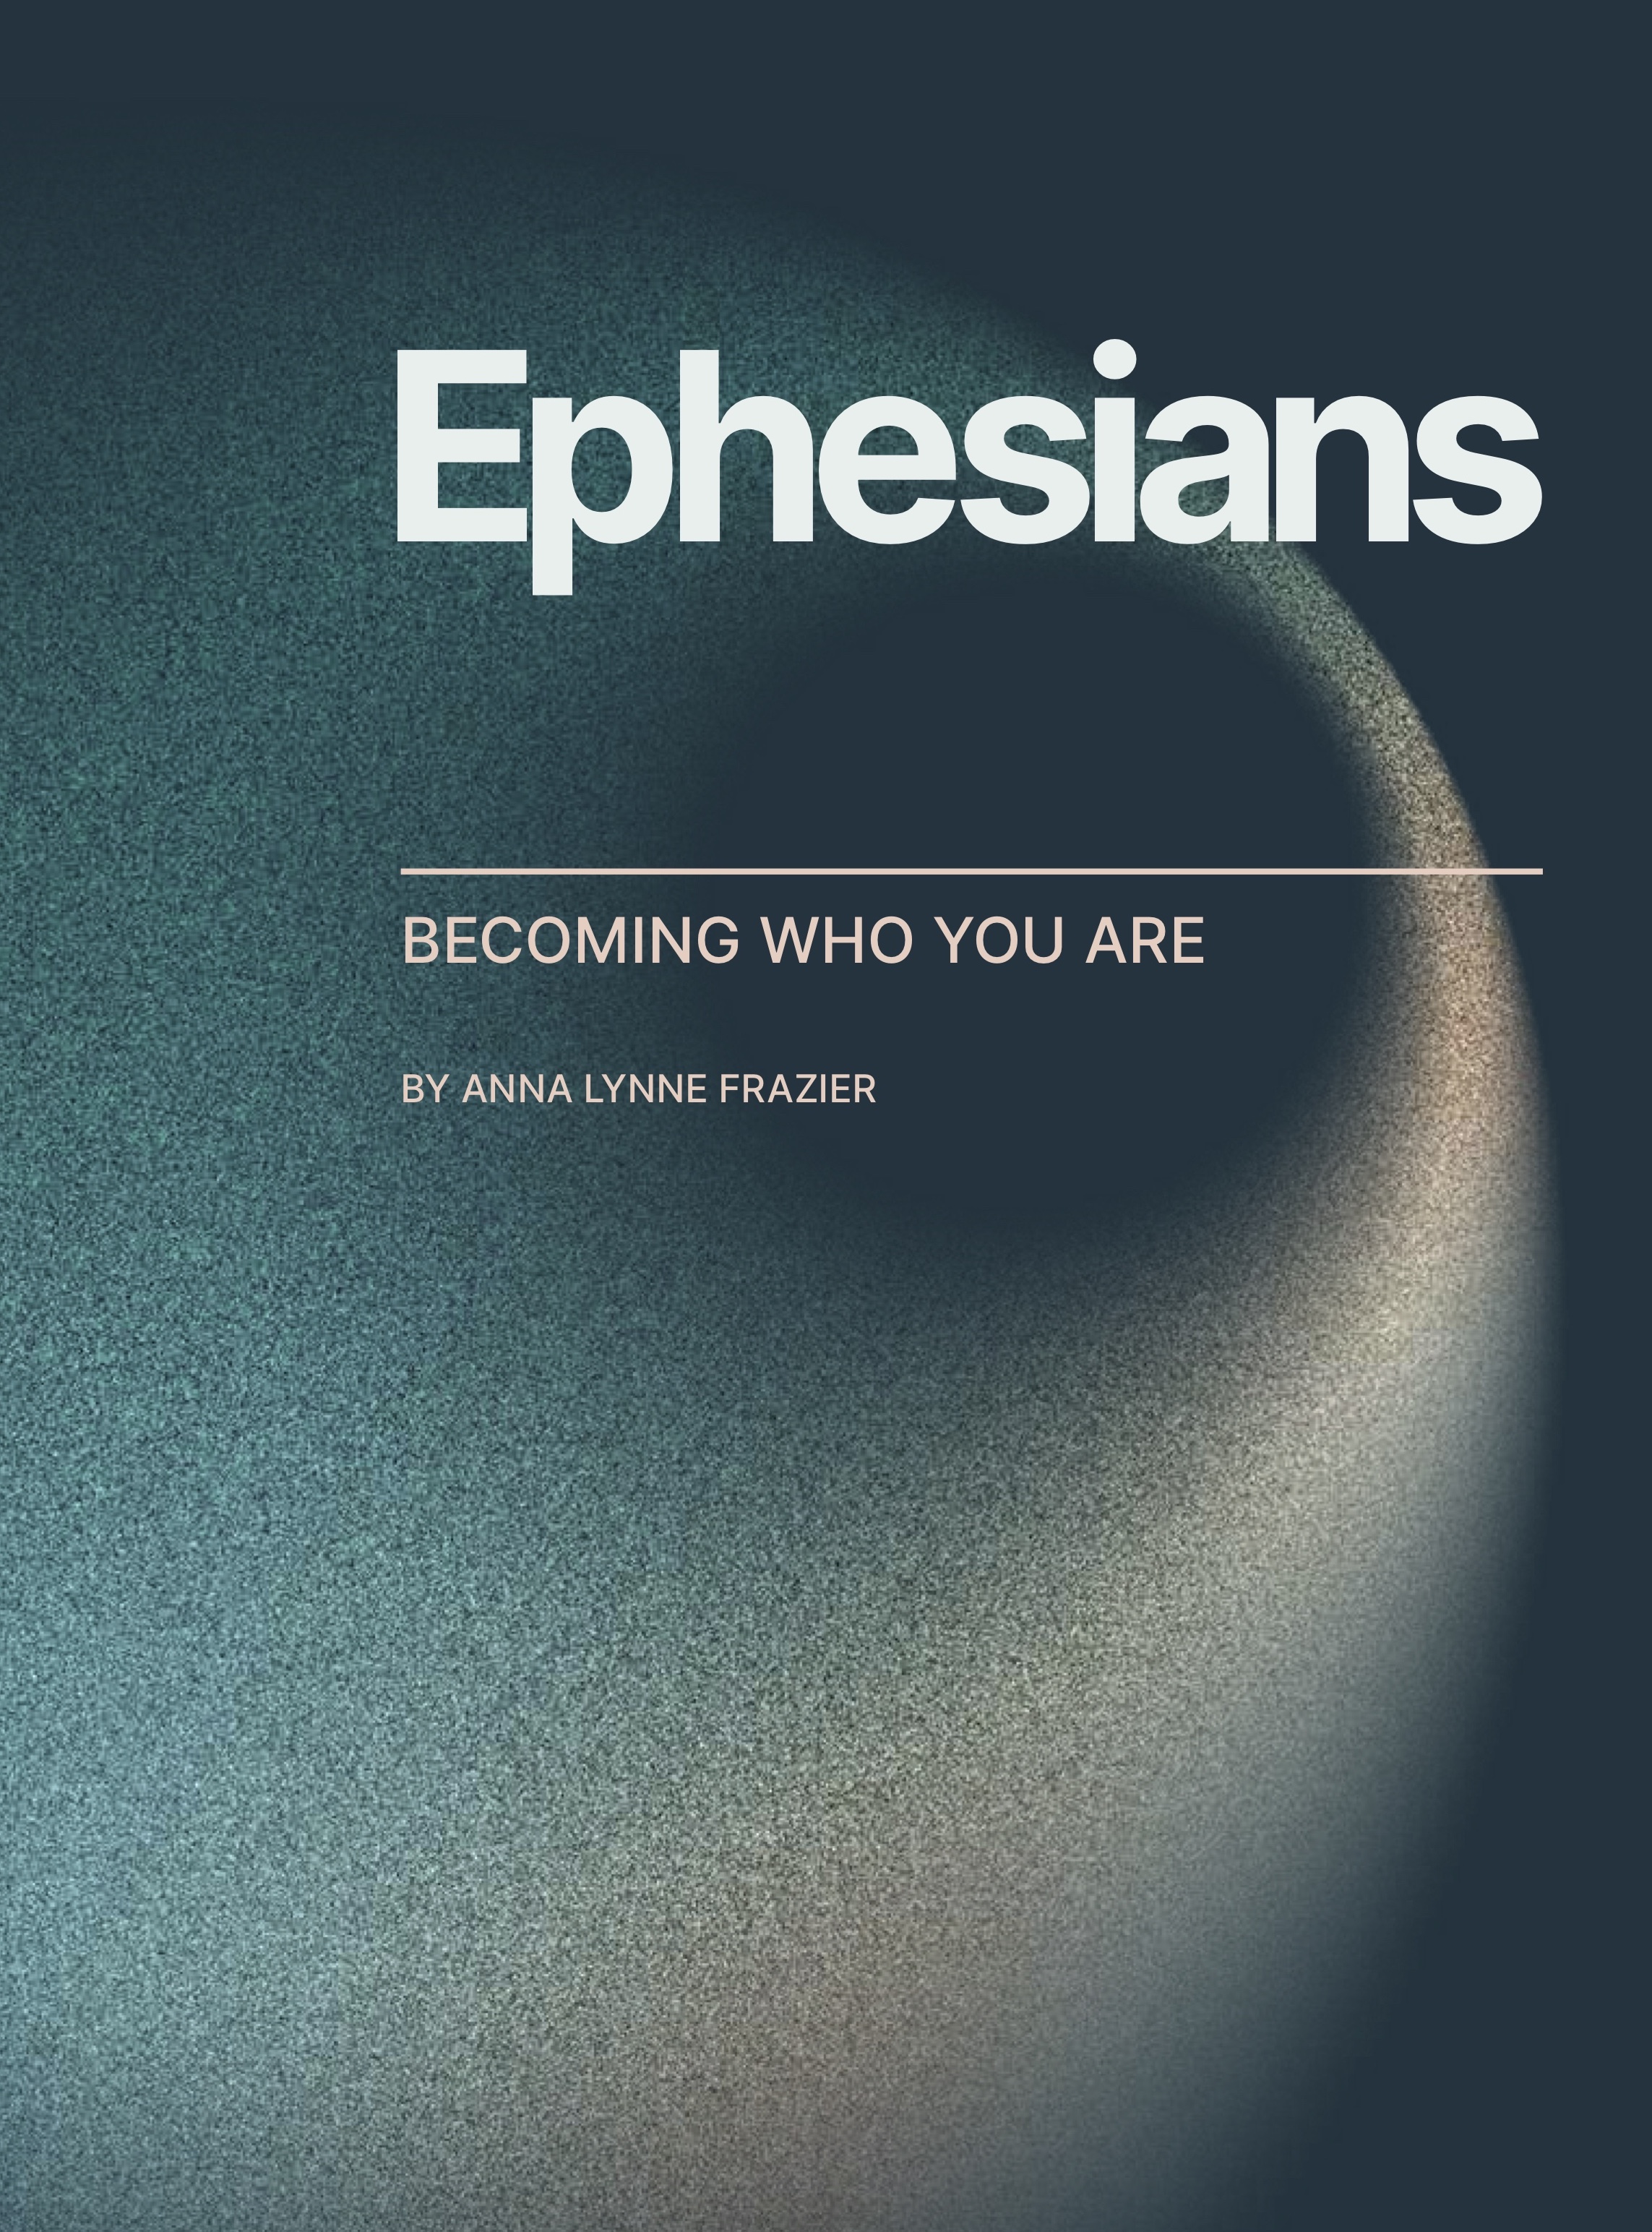 Ephesians: Becoming Who You Are